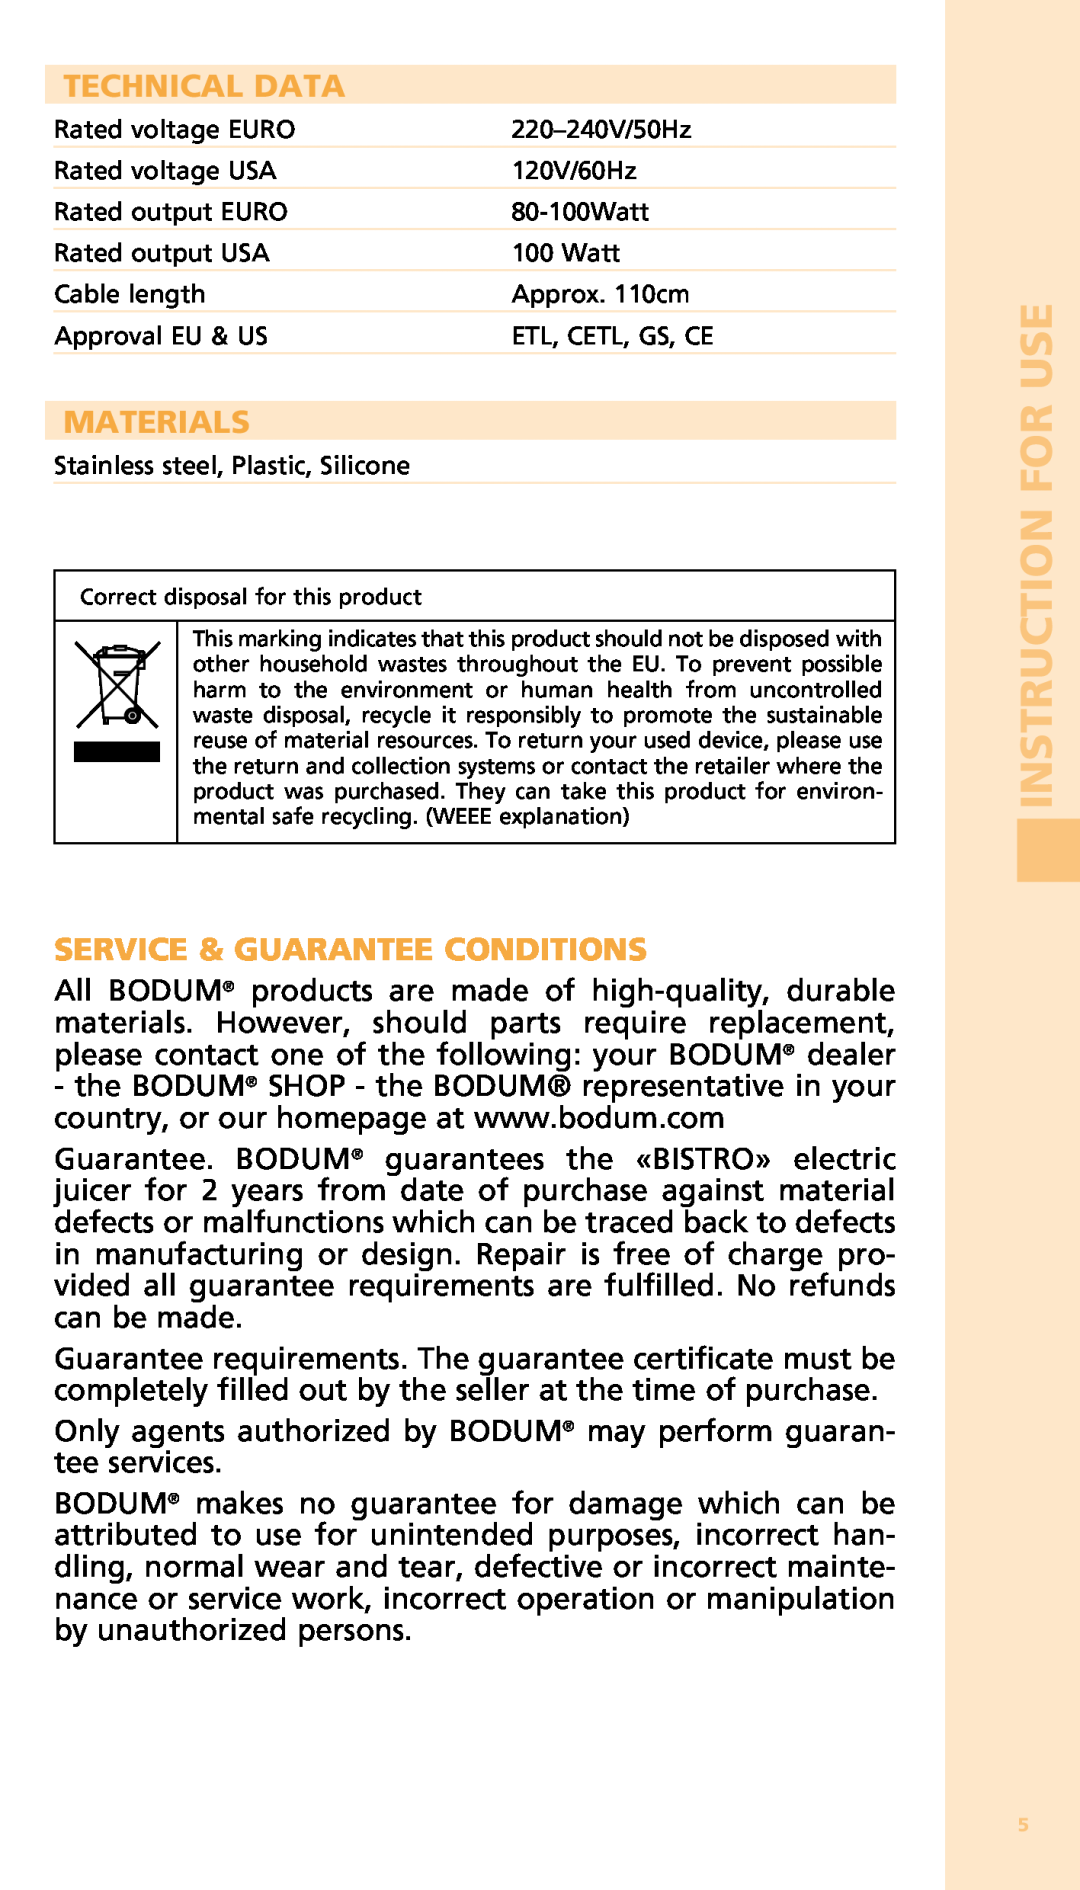 Bodum 11149 warranty Technical Data, Materials, Service & Guarantee Conditions, Instruction for use 